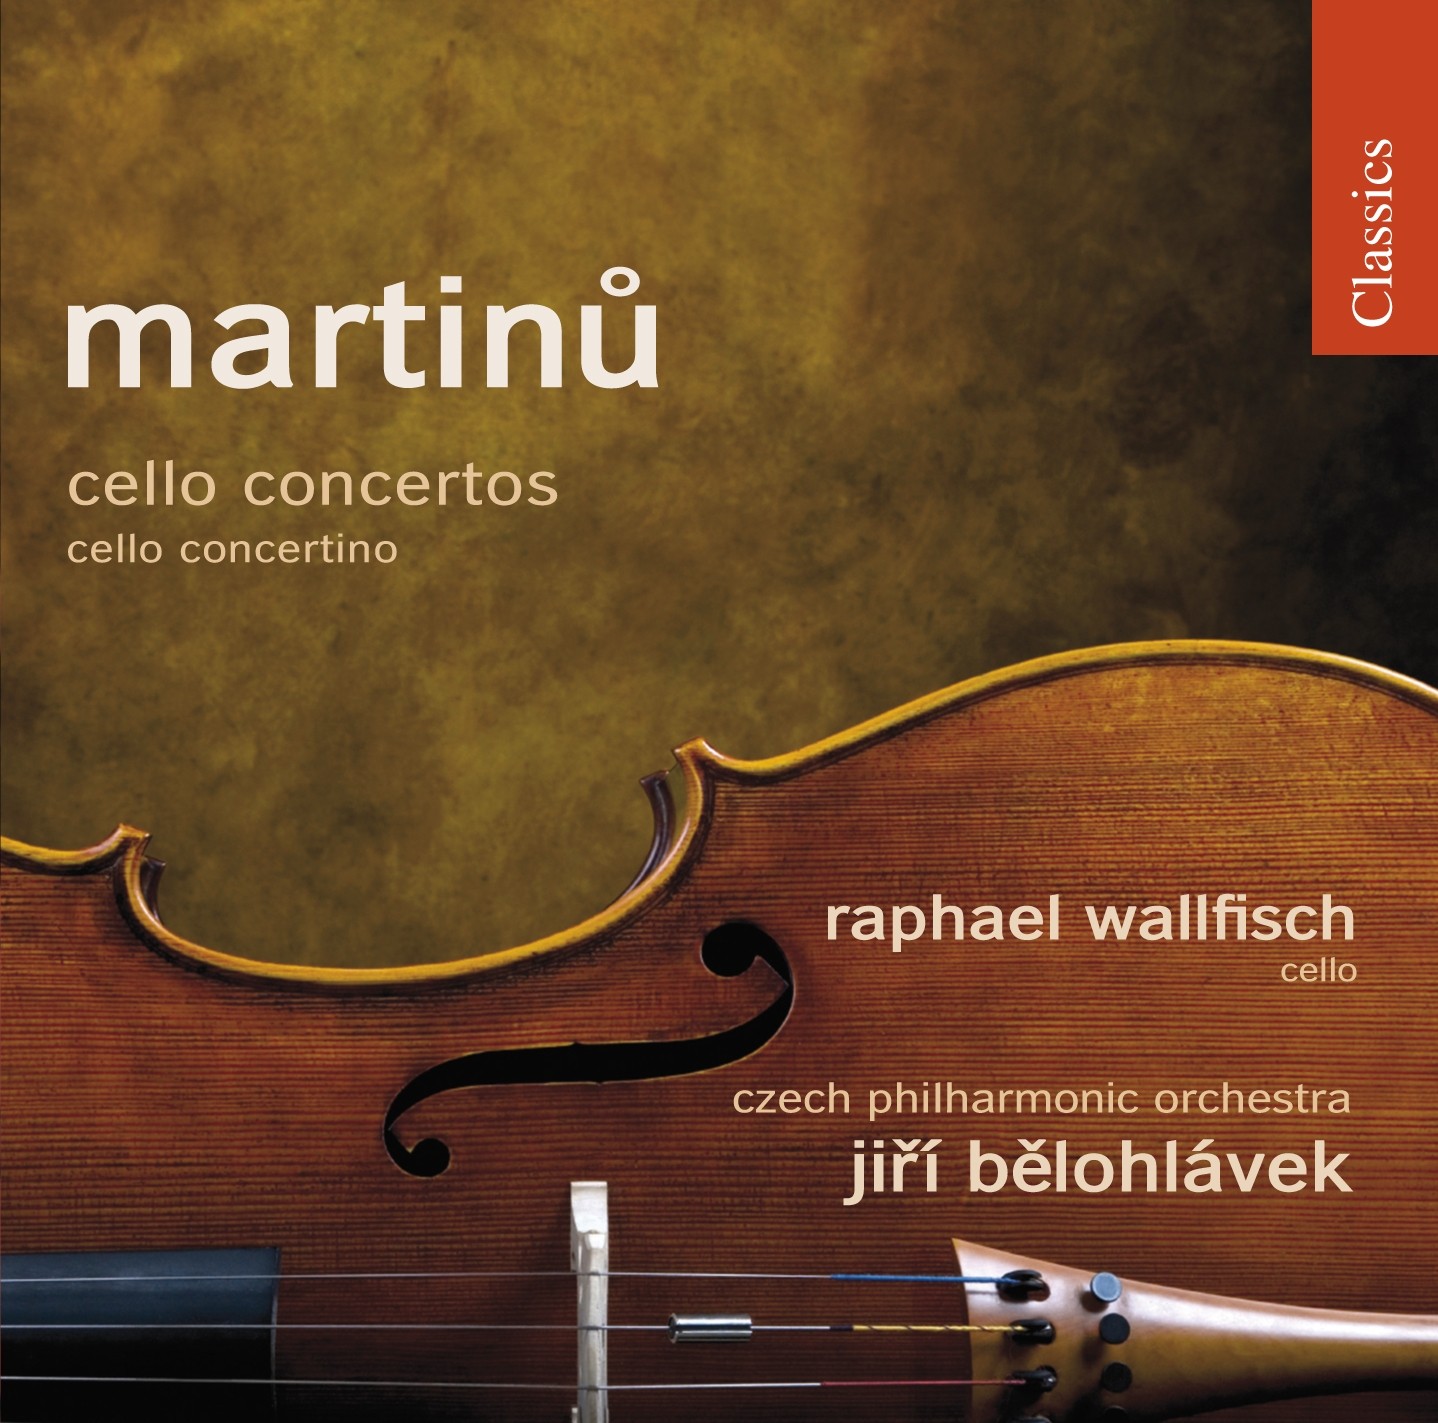 Martinu - Works for Cello and Orchestra.